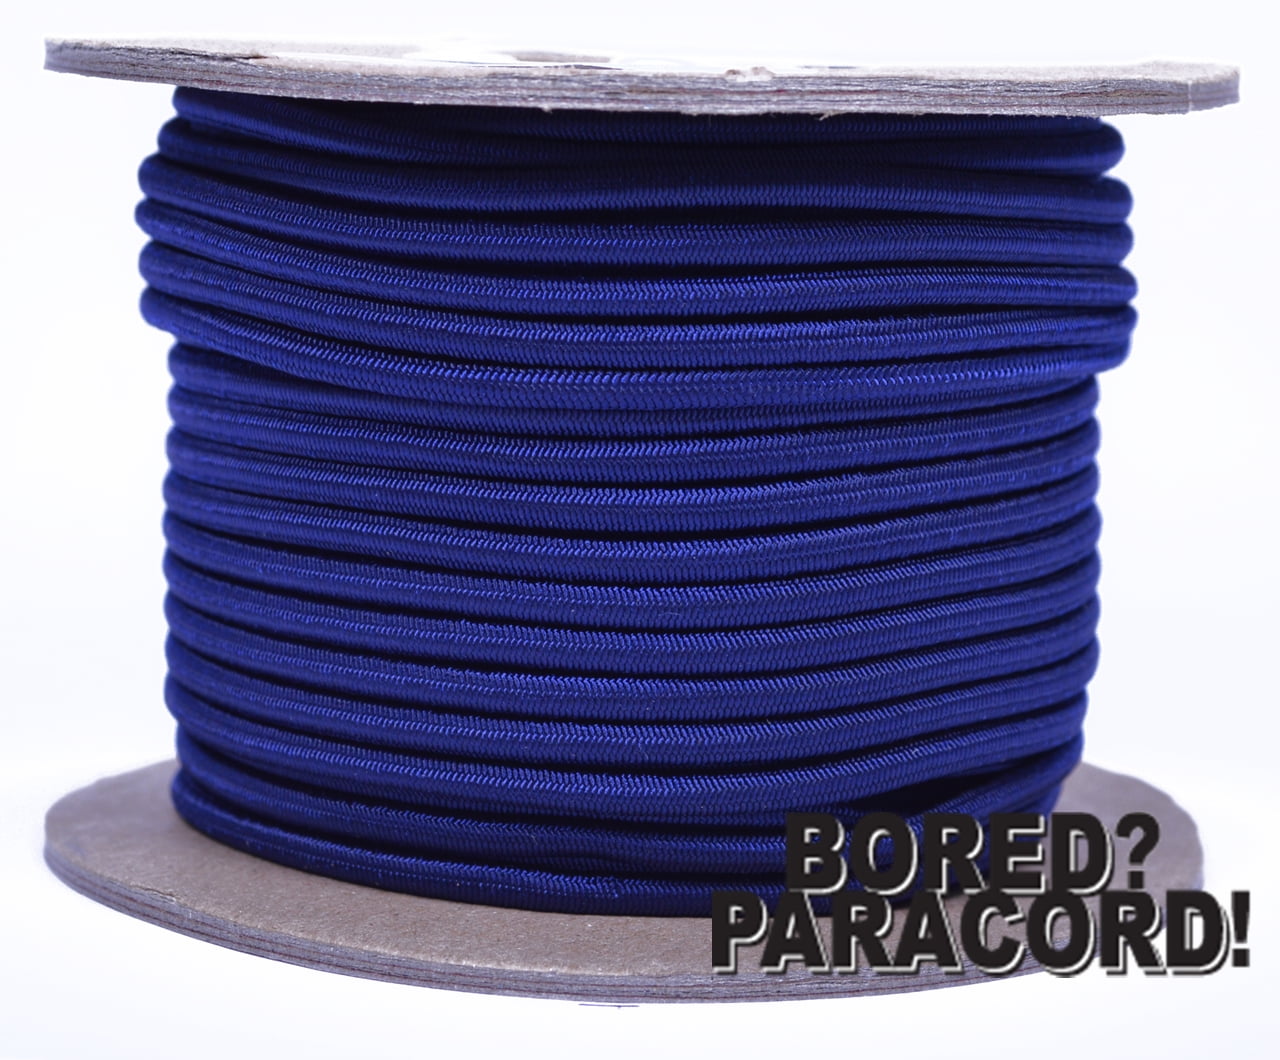 100 Feet Marine Grade Shock Bungee Cord - Multiple Colors to Choose From 